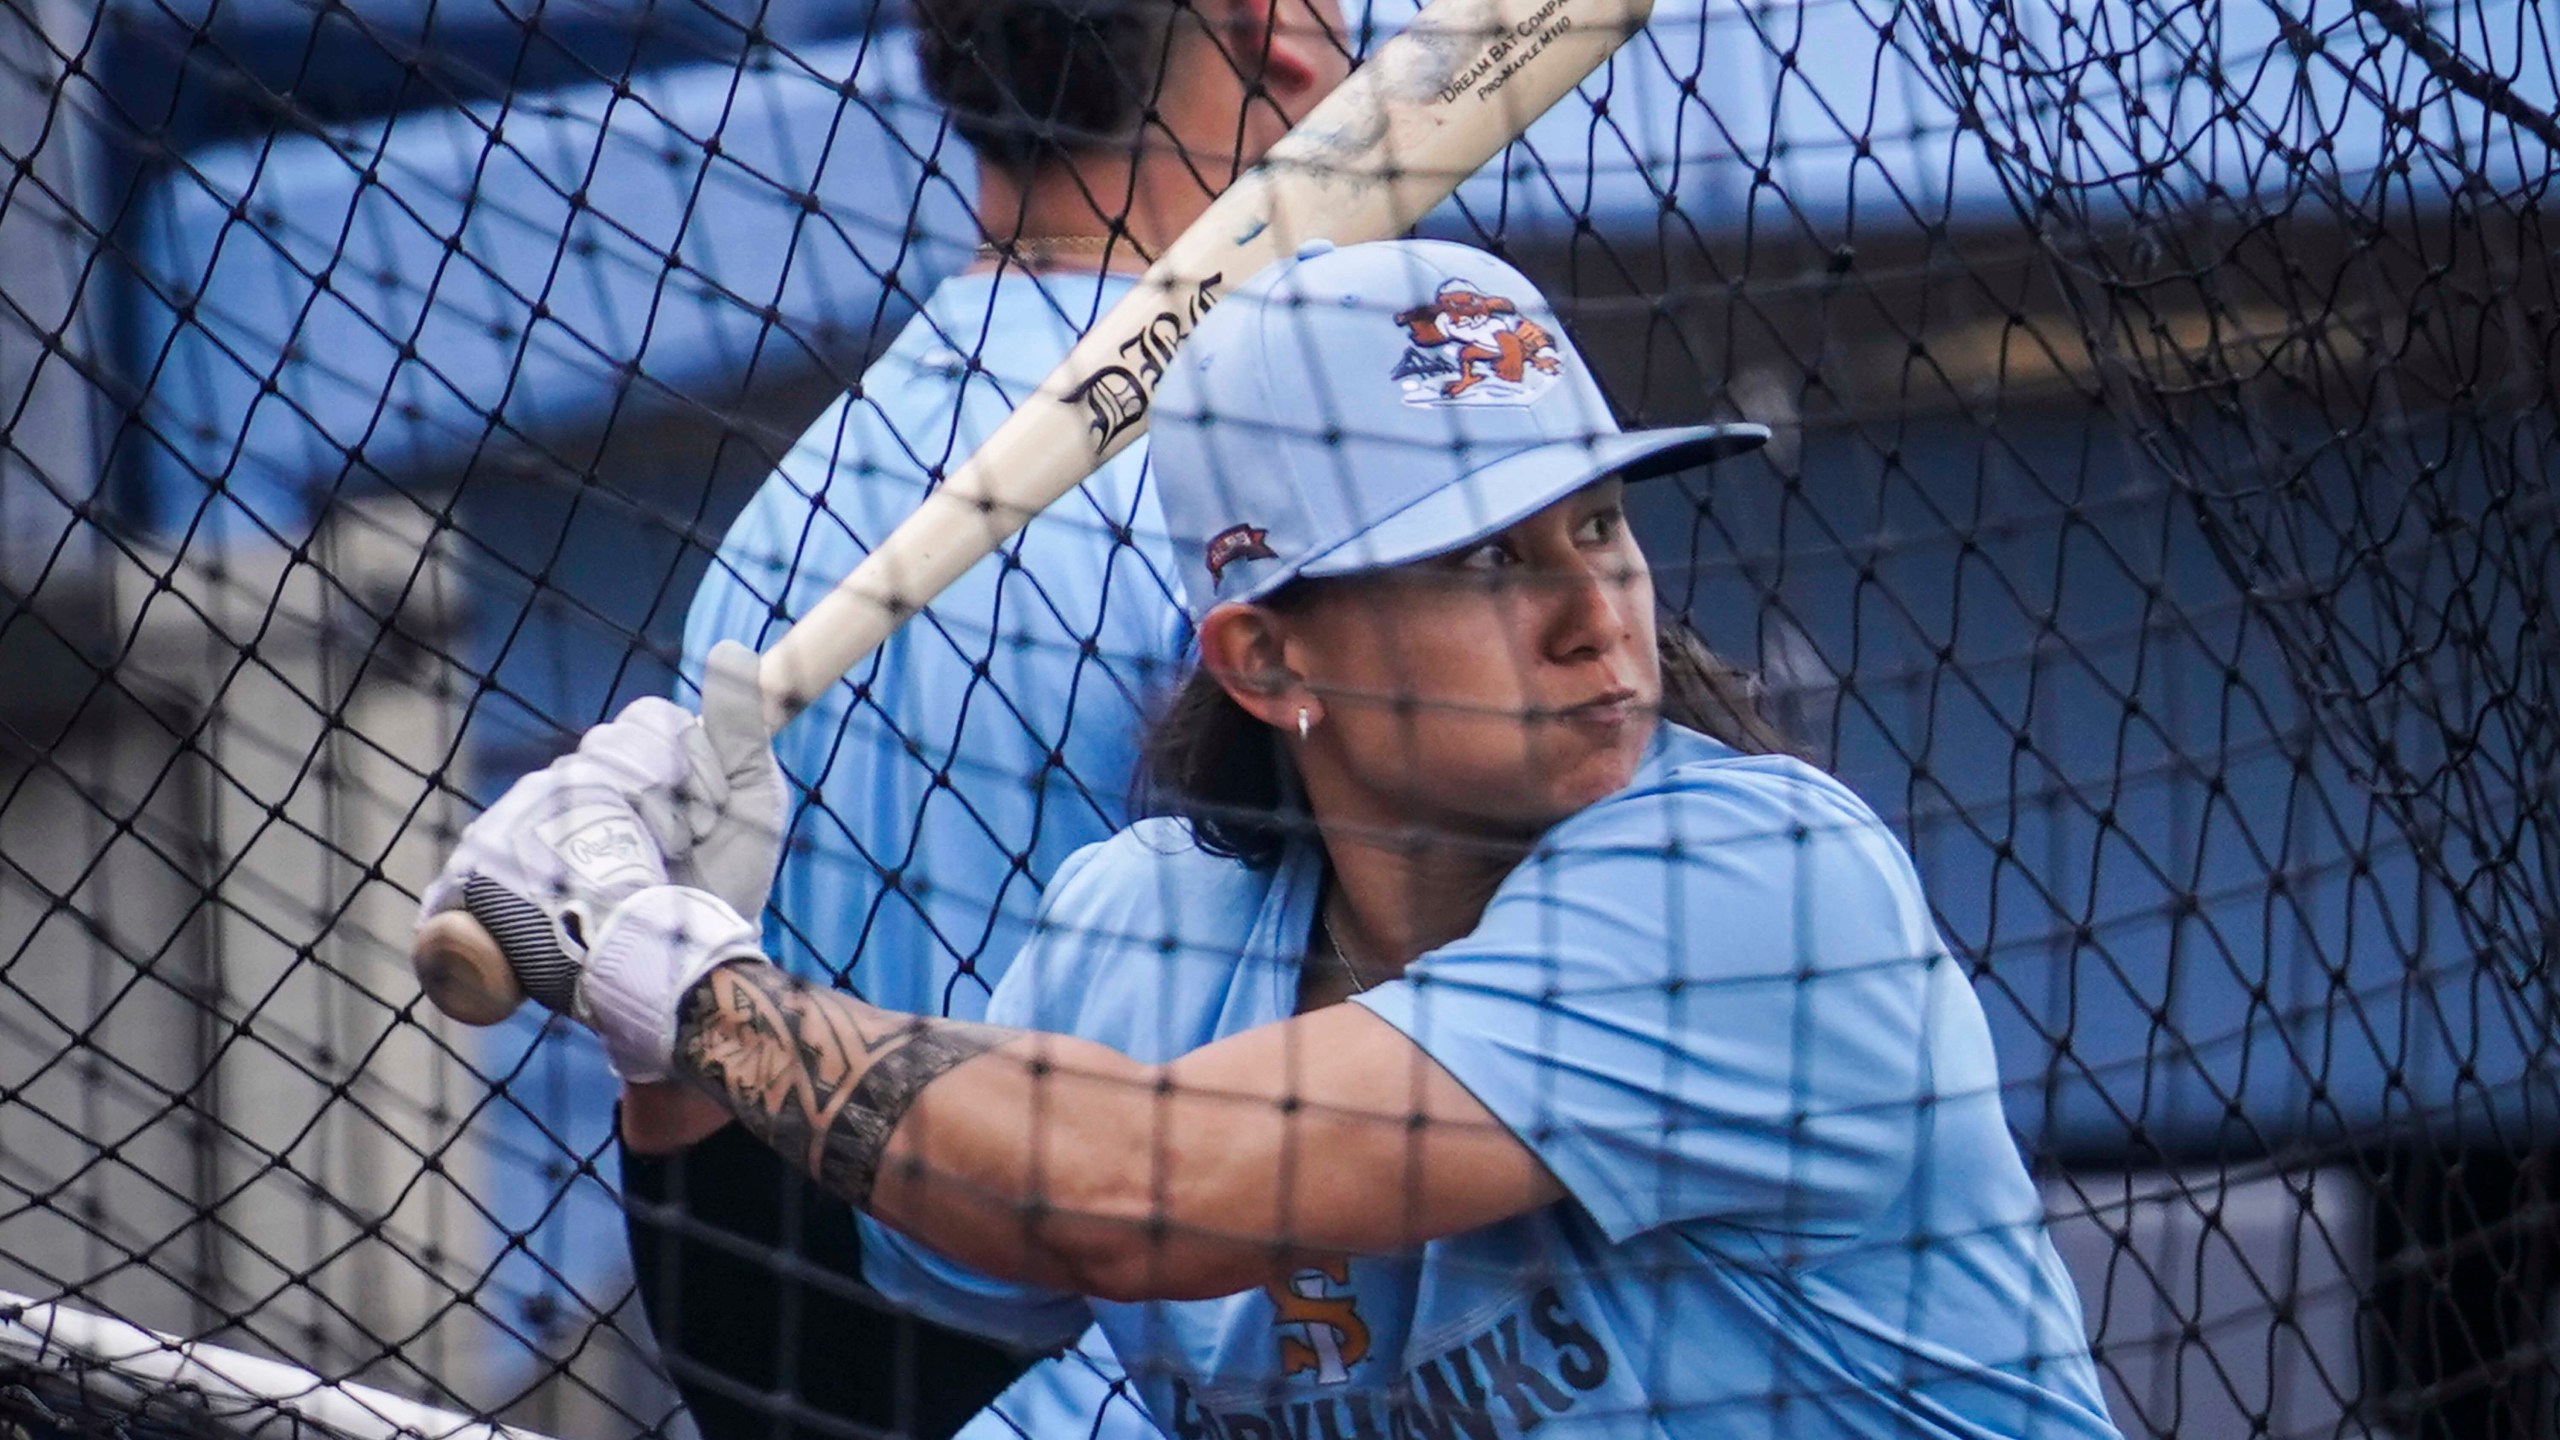 FILE -Kelsie Whitmore, a 23-year-old two-way player for the Atlantic League's Staten Island FerryHawks, warmup in the batting cage, Friday, May 13, 2022, in New York. MLB The Show 24 has unveiled Whitmore, a female player mode for this year's video game. A trailer released Tuesday, March 5, 2024 showcases “Road to the Show: Women Pave Their Way” for the game scheduled to be released March 19. (AP Photo/Bebeto Matthews, File)